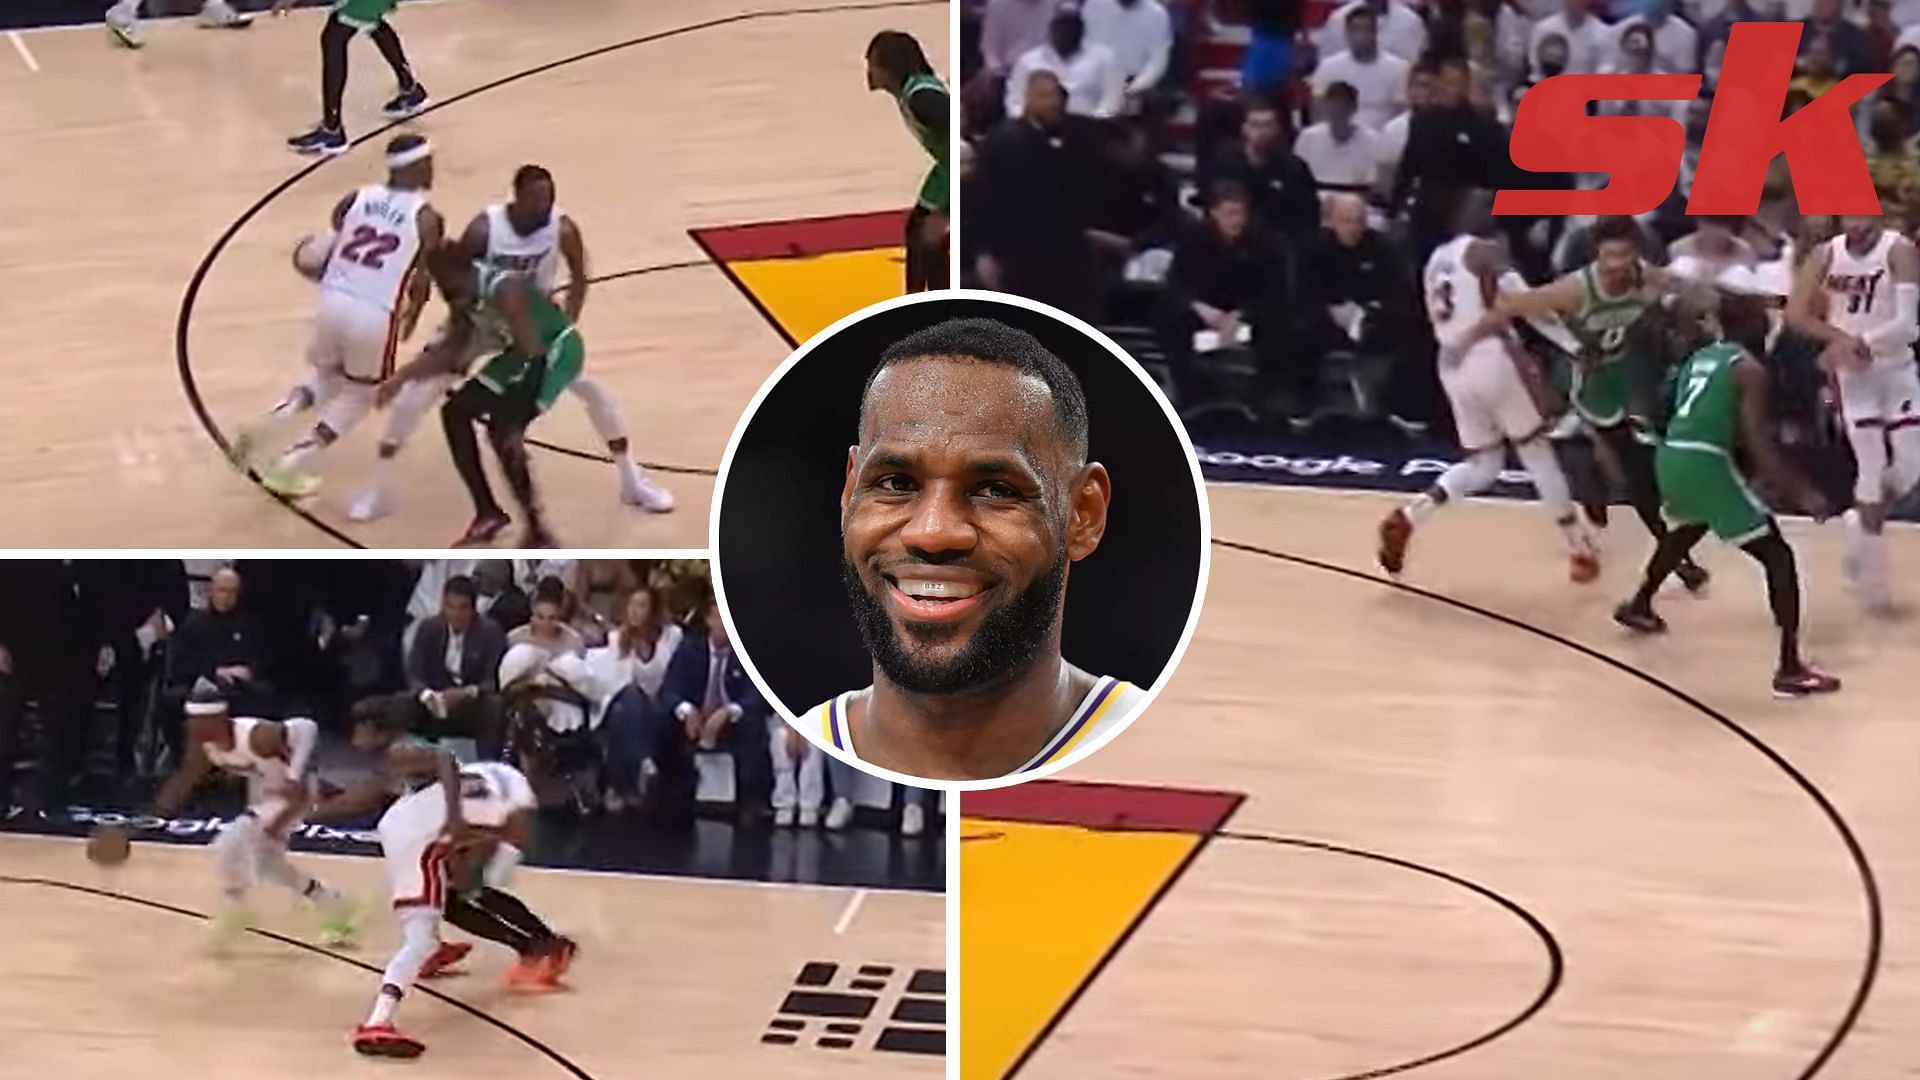 LeBron James calls out excessive physicality in Boston v Miami series